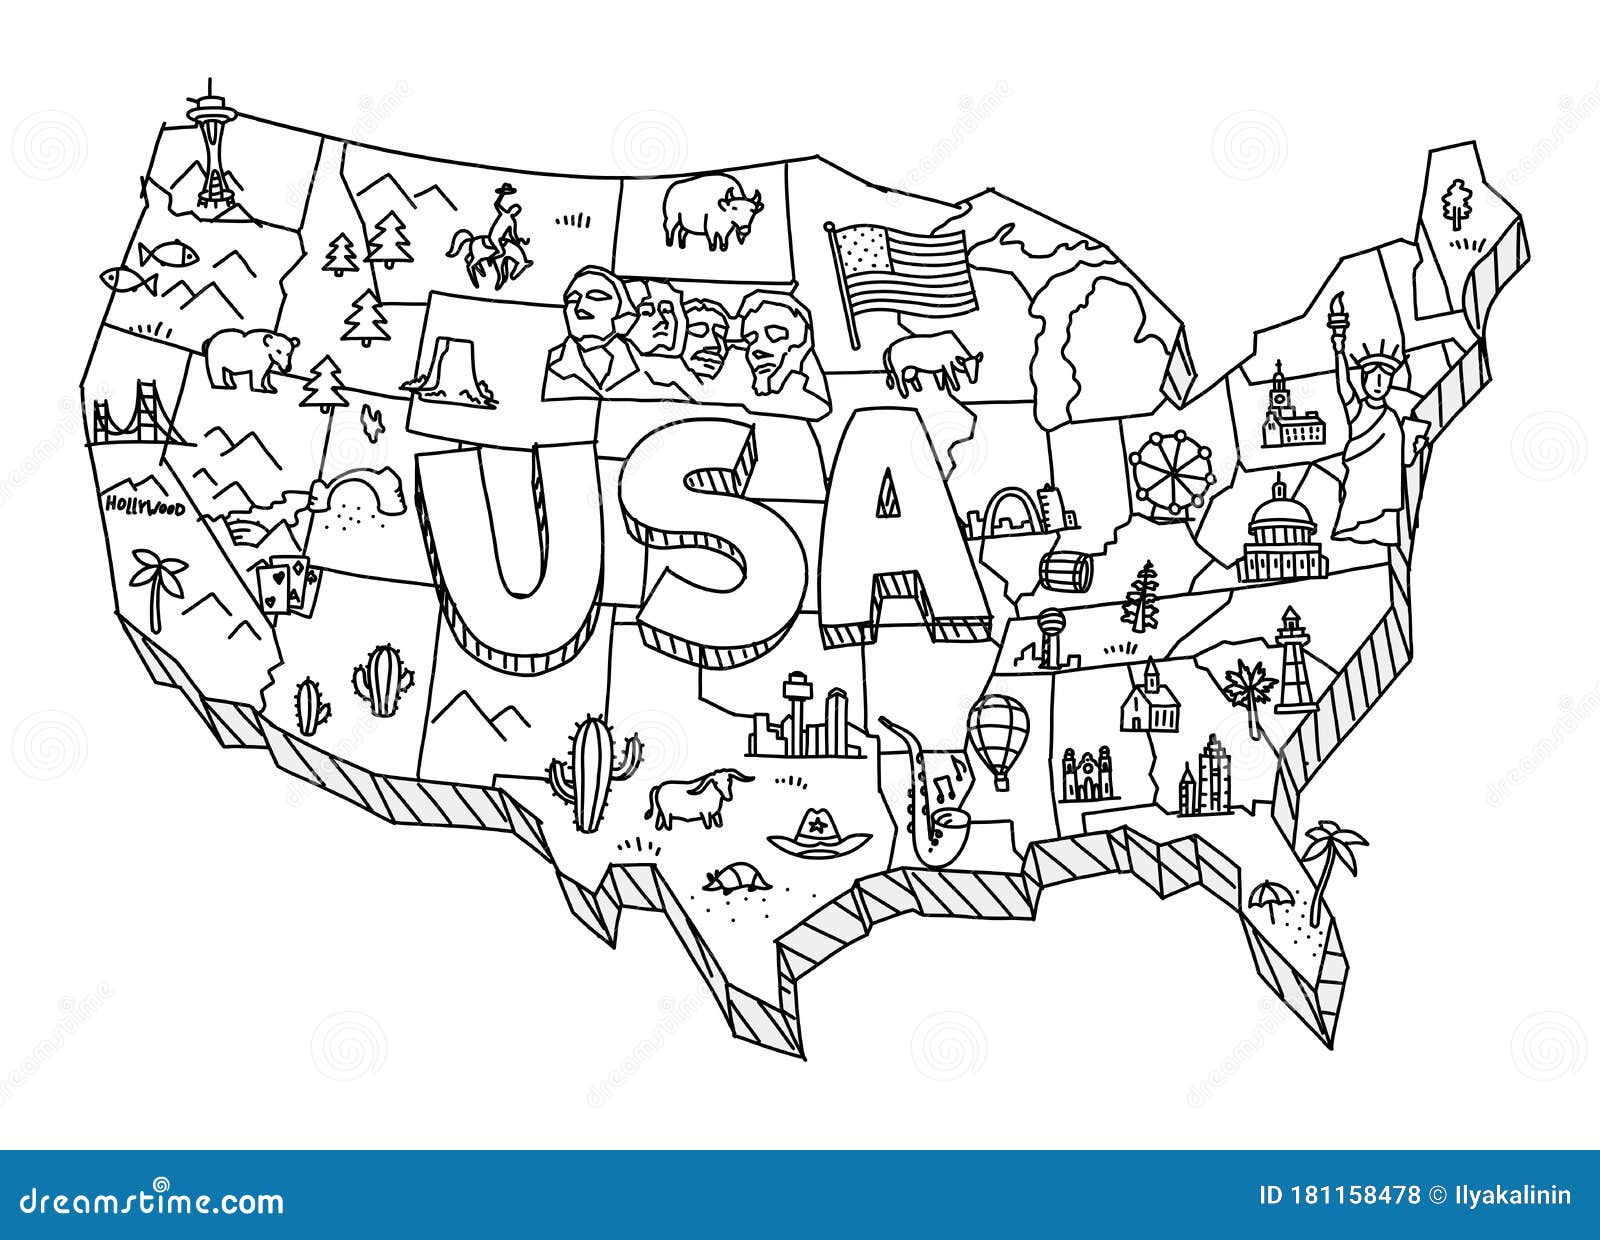 Illustrated Usa Map Sketch Tourist Attraction United States Of